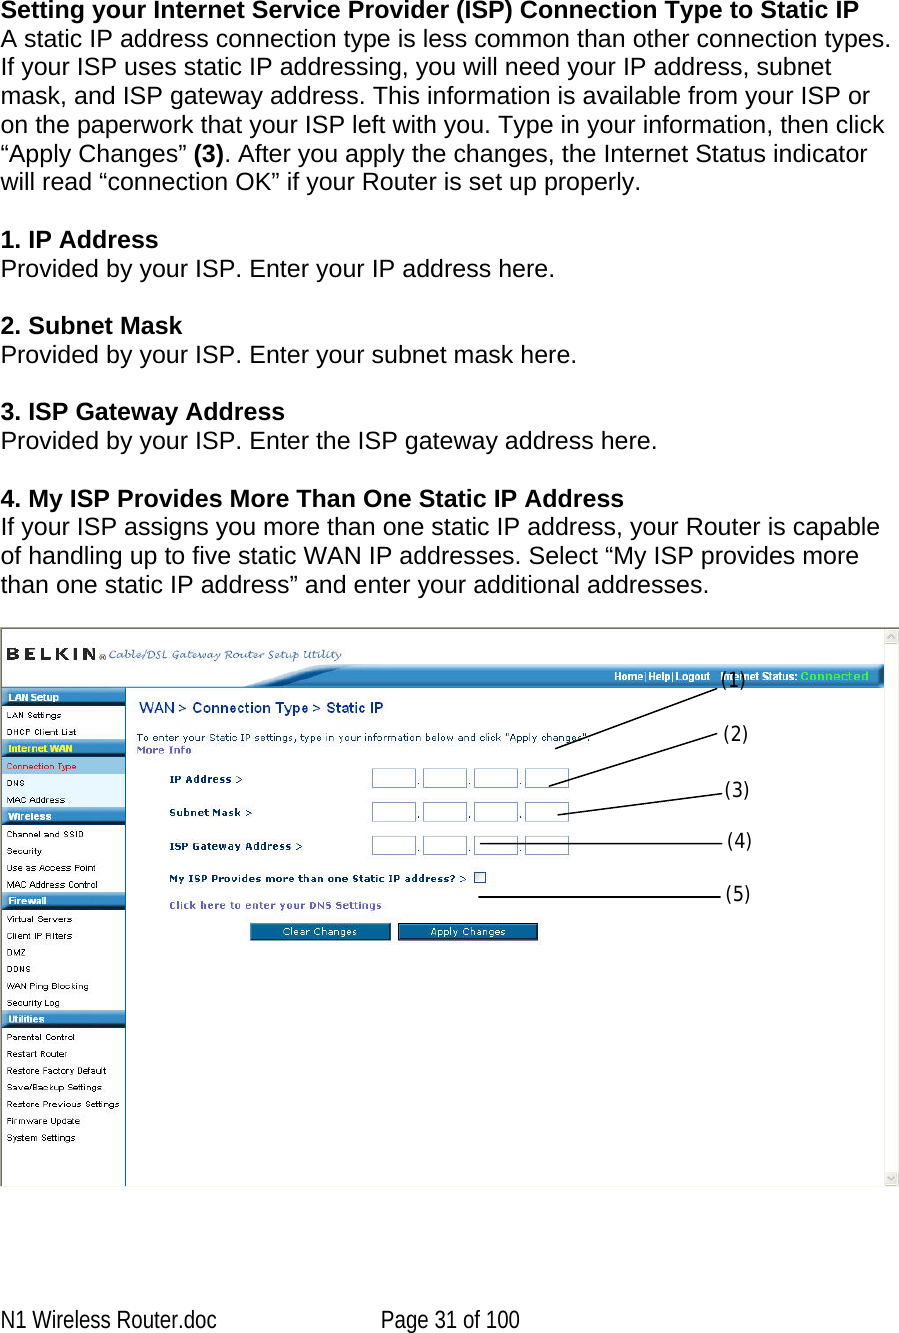      Setting your Internet Service Provider (ISP) Connection Type to Static IP  A static IP address connection type is less common than other connection types. If your ISP uses static IP addressing, you will need your IP address, subnet mask, and ISP gateway address. This information is available from your ISP or on the paperwork that your ISP left with you. Type in your information, then click “Apply Changes” (3). After you apply the changes, the Internet Status indicator will read “connection OK” if your Router is set up properly.  1. IP Address Provided by your ISP. Enter your IP address here.  2. Subnet Mask  Provided by your ISP. Enter your subnet mask here.  3. ISP Gateway Address Provided by your ISP. Enter the ISP gateway address here.   4. My ISP Provides More Than One Static IP Address If your ISP assigns you more than one static IP address, your Router is capable of handling up to five static WAN IP addresses. Select “My ISP provides more than one static IP address” and enter your additional addresses.   (1) (2) (3) (4) (5) N1 Wireless Router.doc  Page 31 of 100 